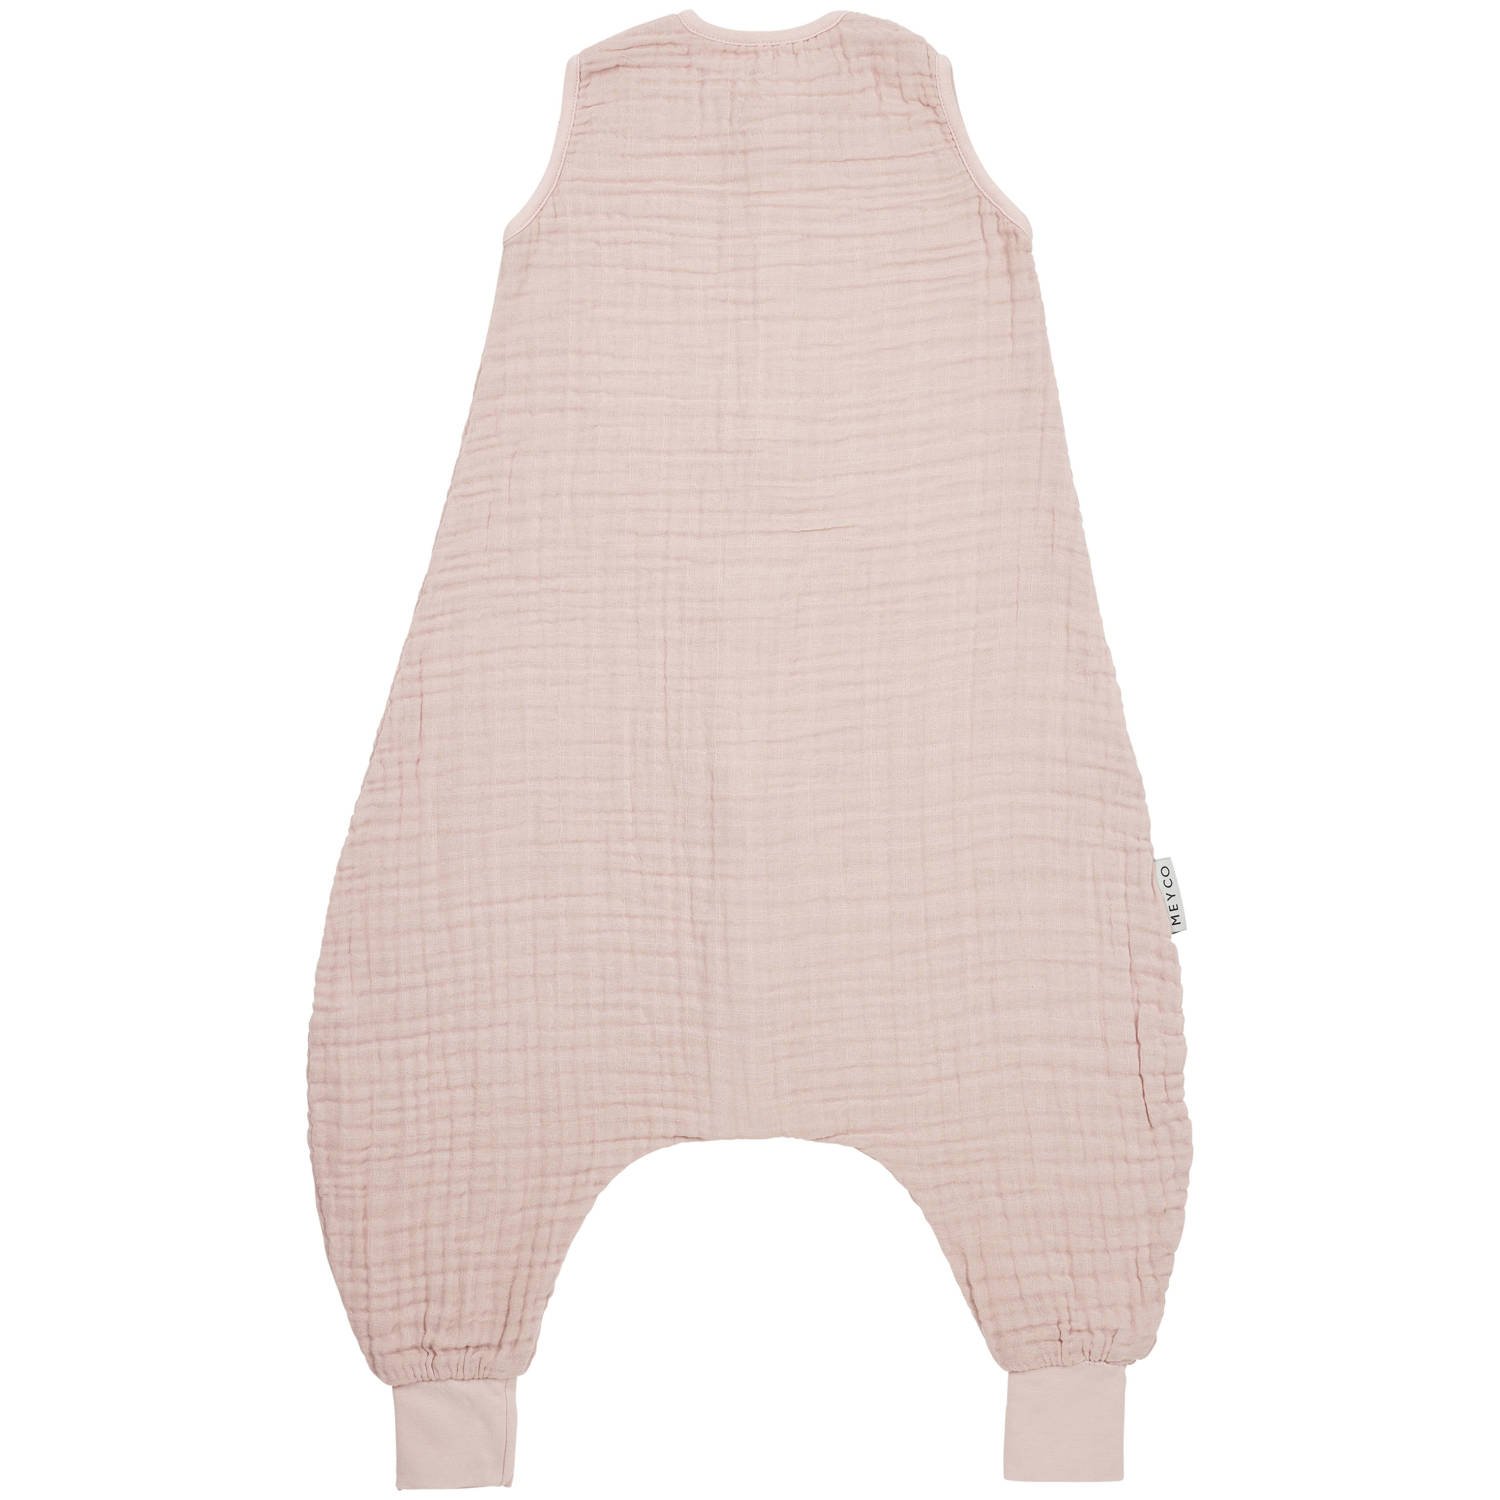 Meyco hydrofiele baby zomer slaapoverall jumper soft pink